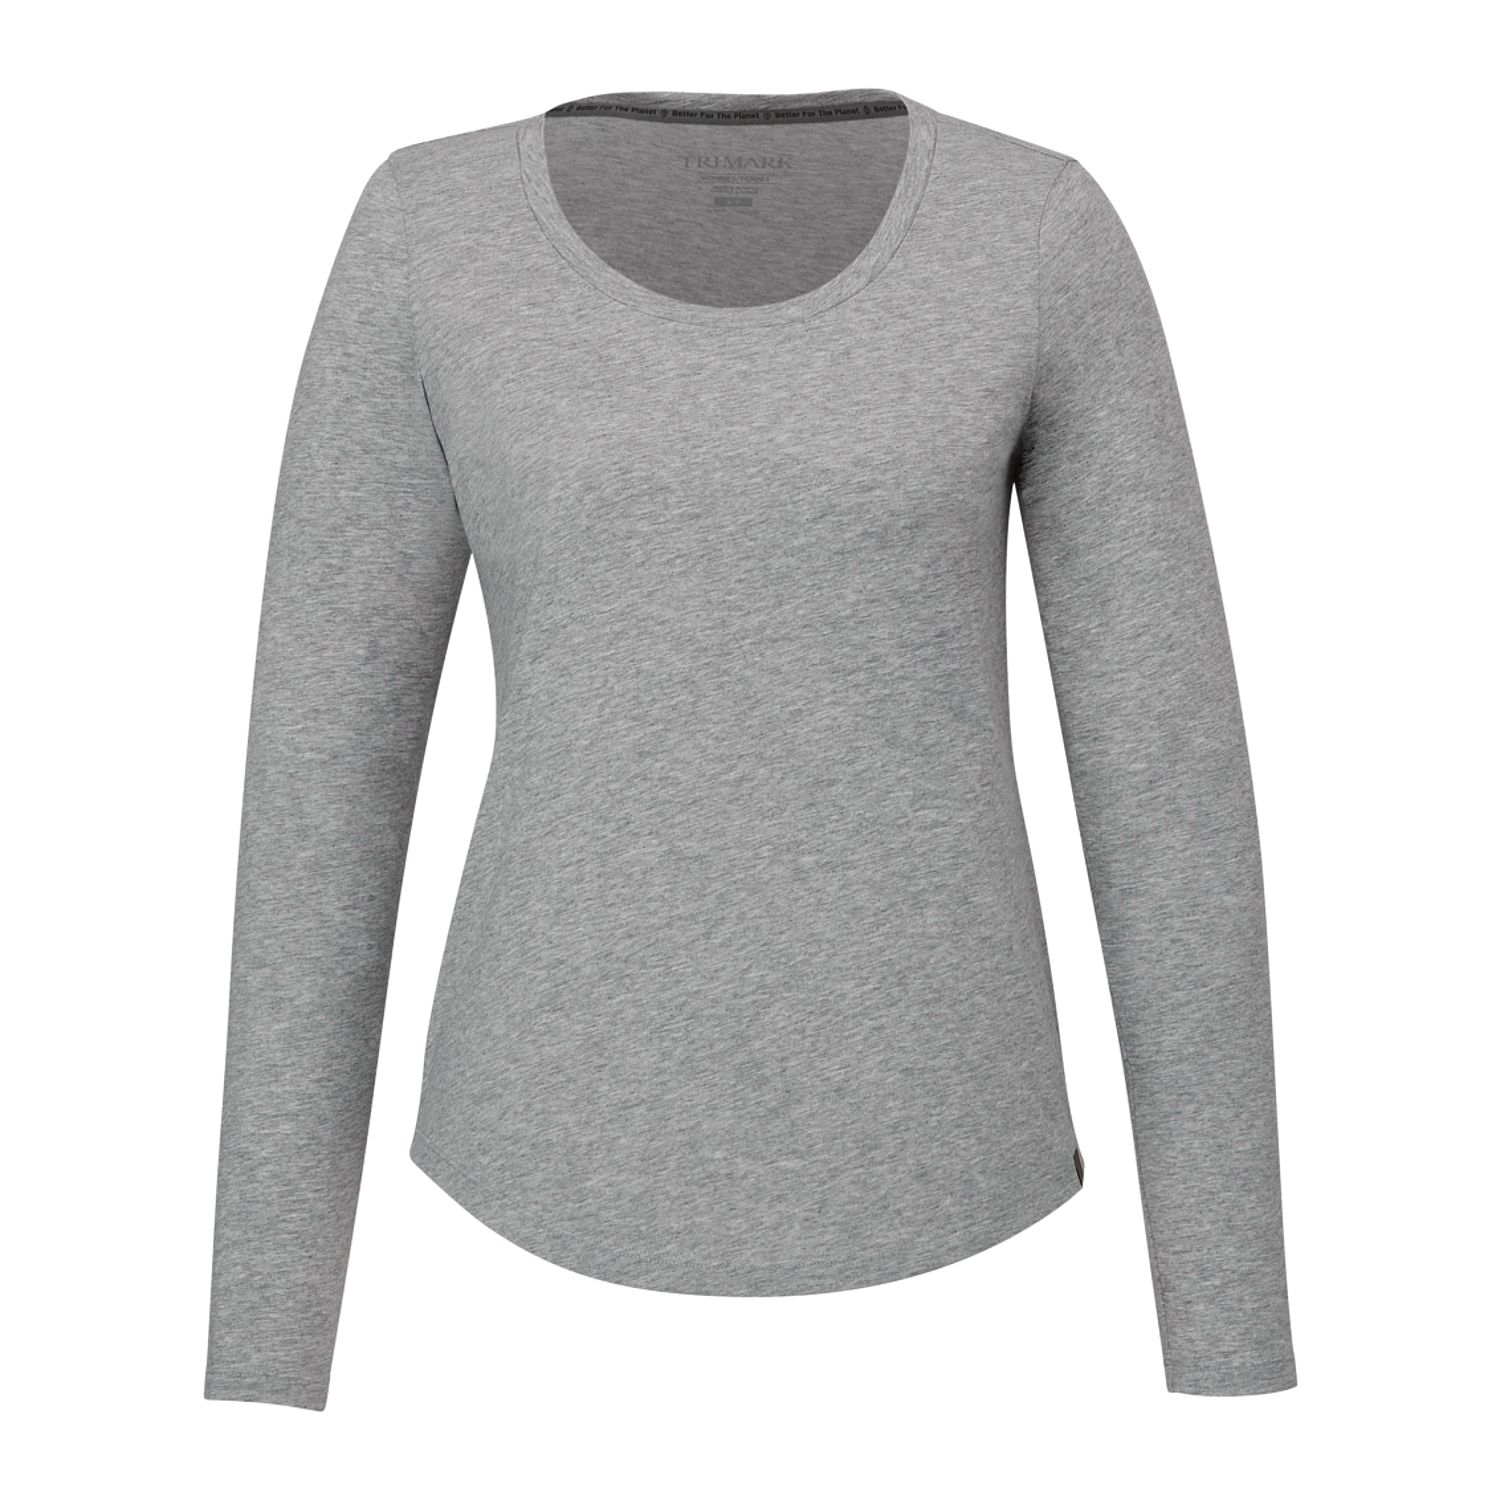 click to view Heather Grey (932)